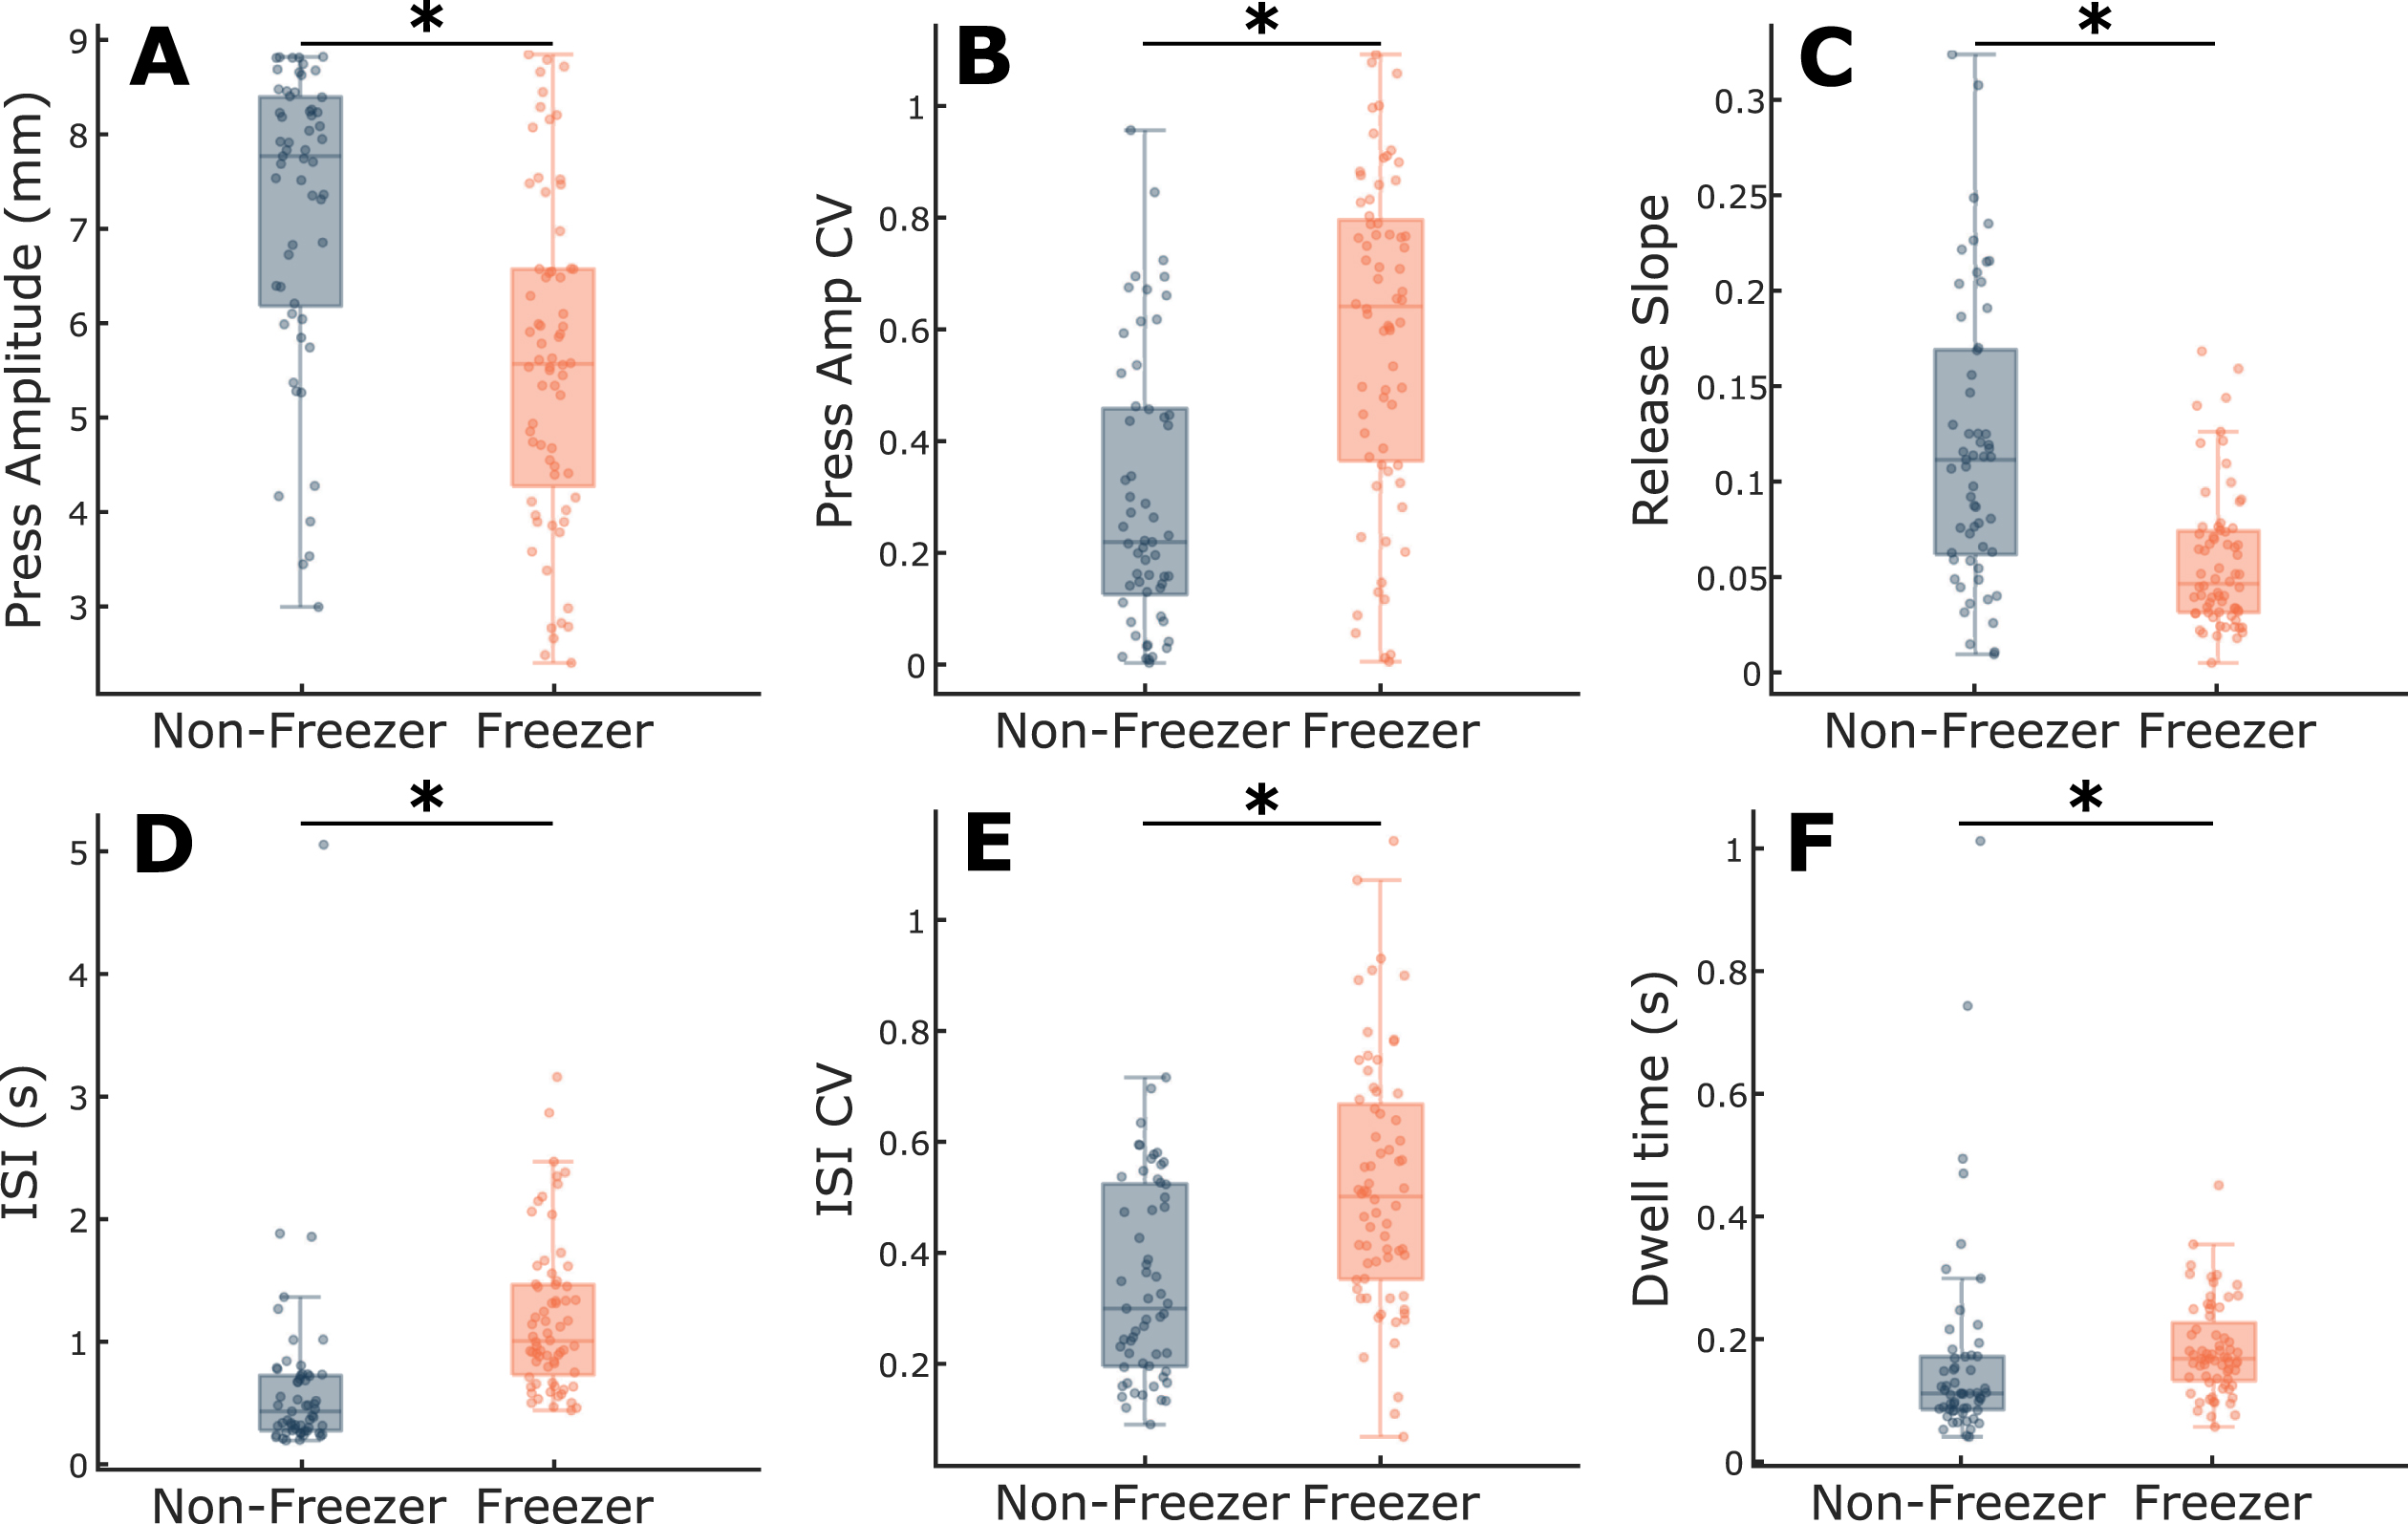 Comparison of QDG metrics between freezer and non-freezer subtypes. Boxplots with individual data overlaid for (A) Press amplitude, (B) Press amplitude CV, (C) Release slope, (D) ISI, (E) ISI CV, and (F) Dwell time. *indicates significant differences between groups. See online edition for color version.